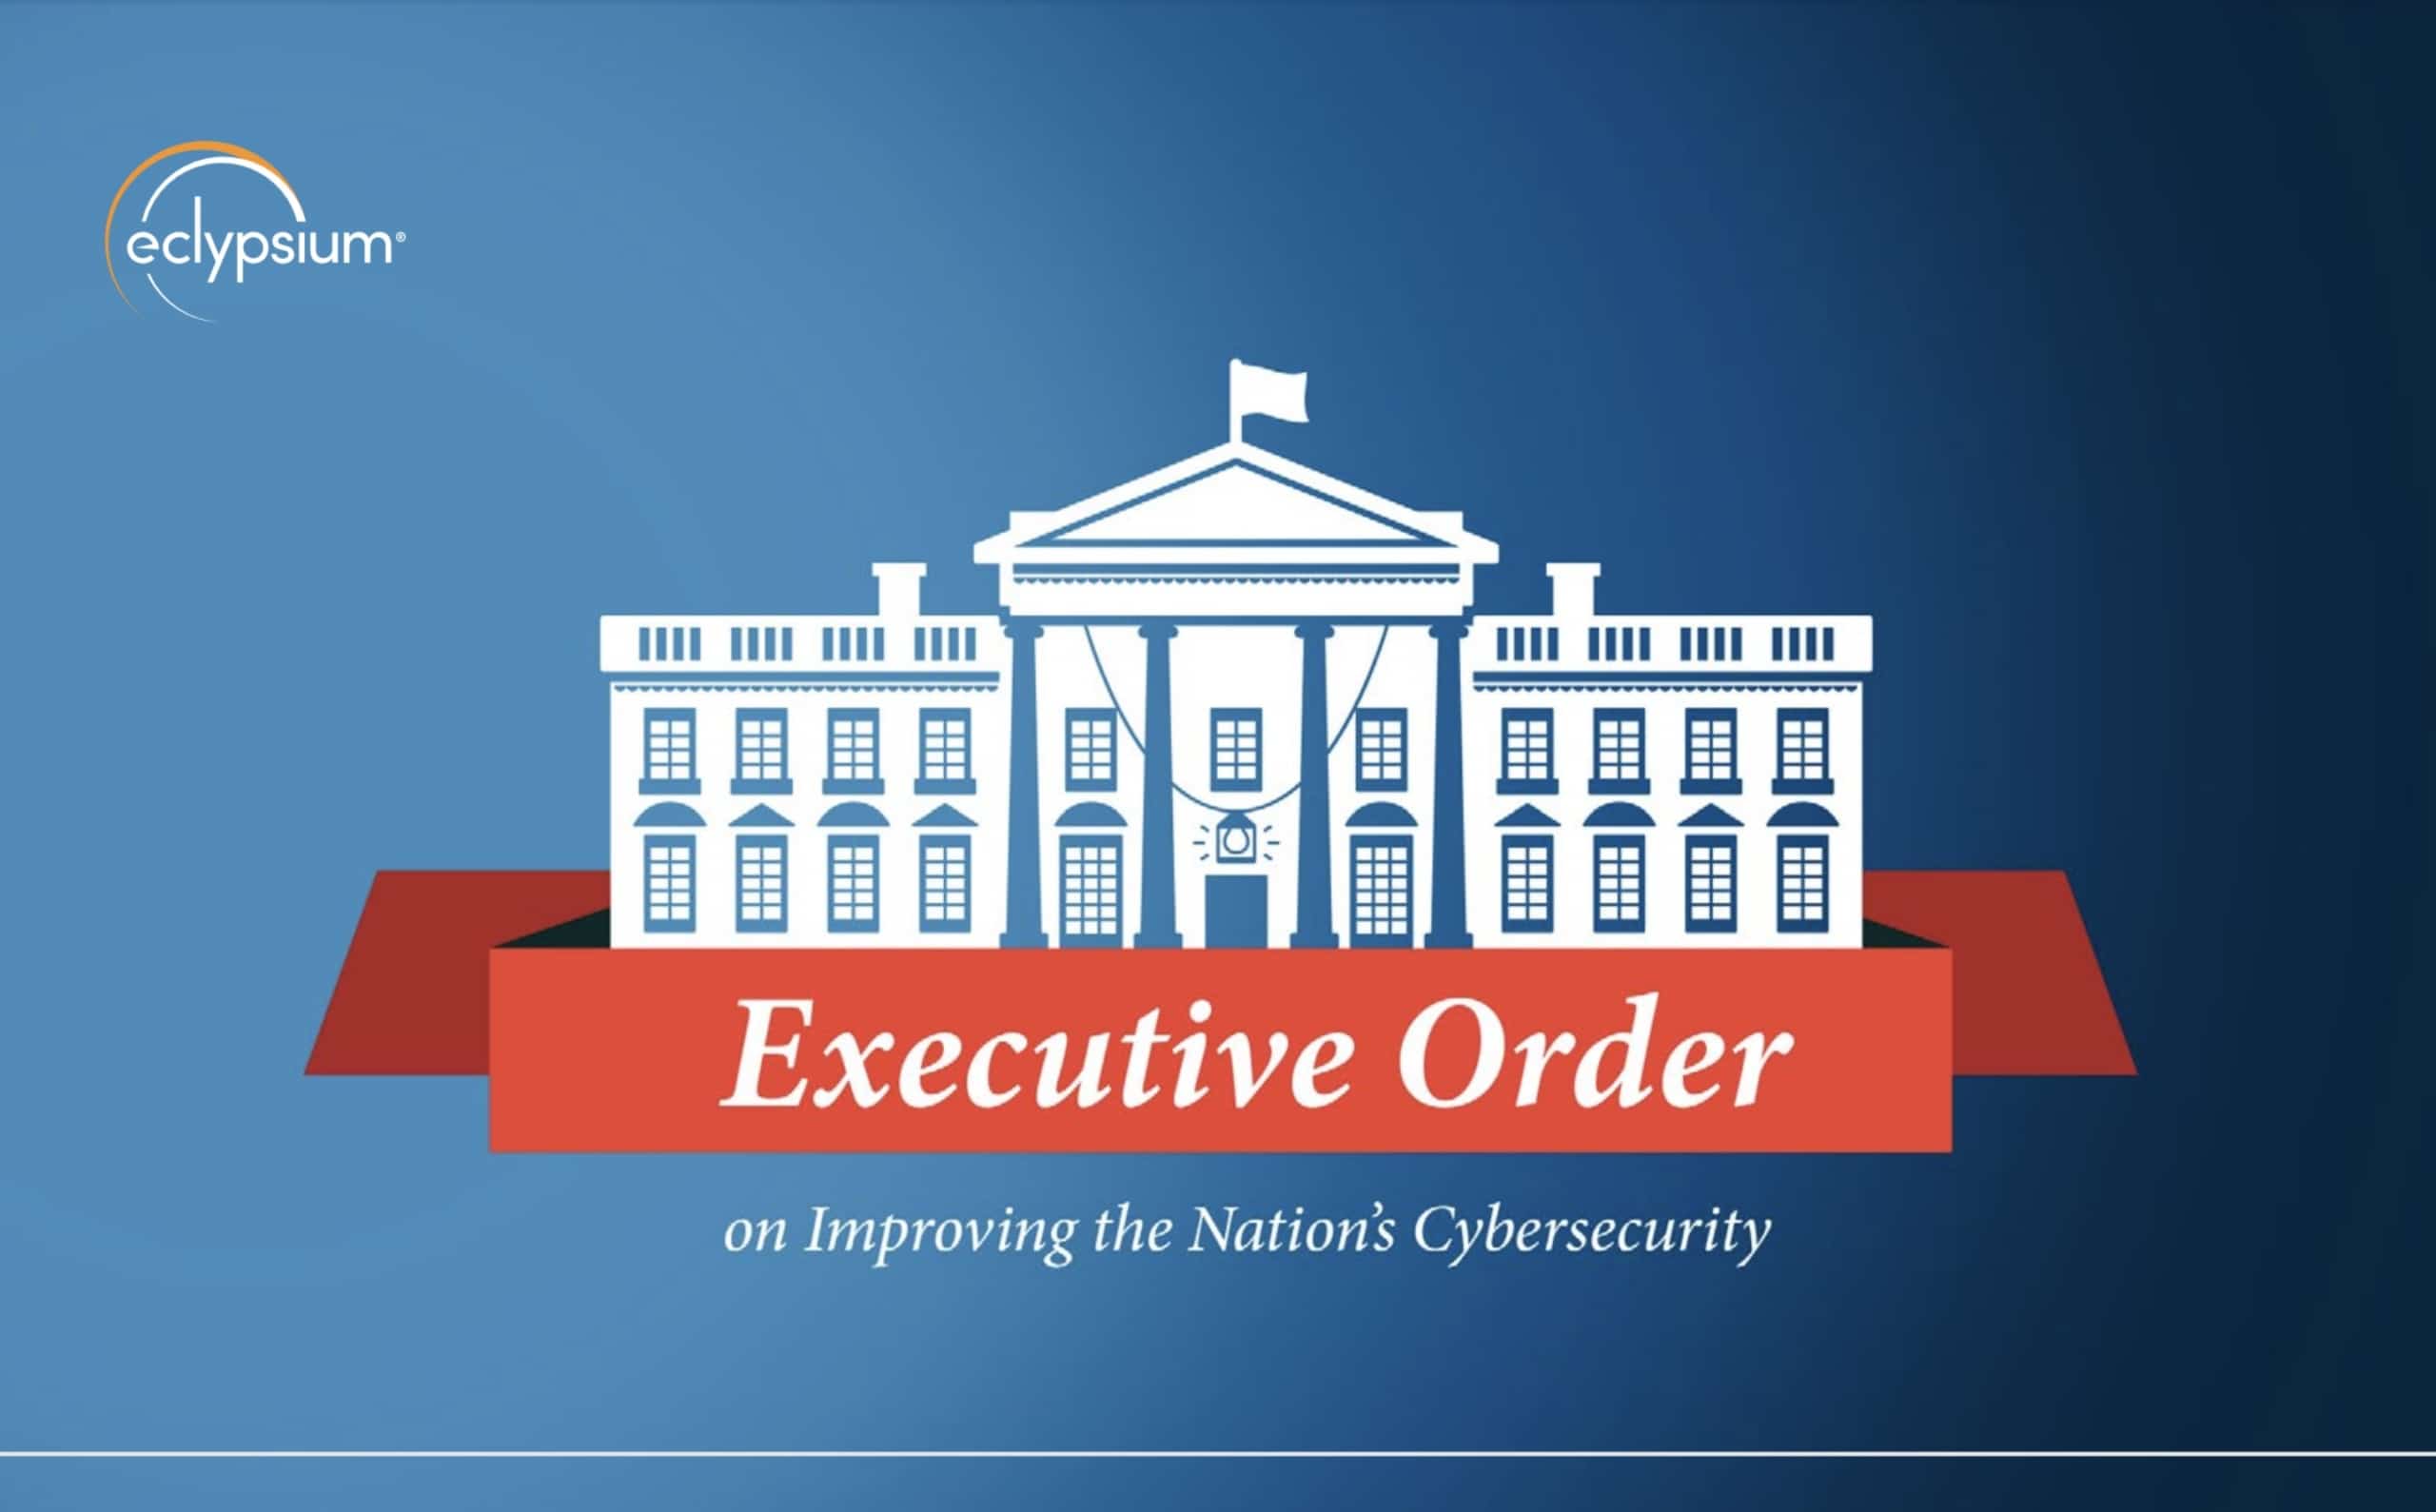 Eclypsium Executive Order on improving the nation's cybersecurity